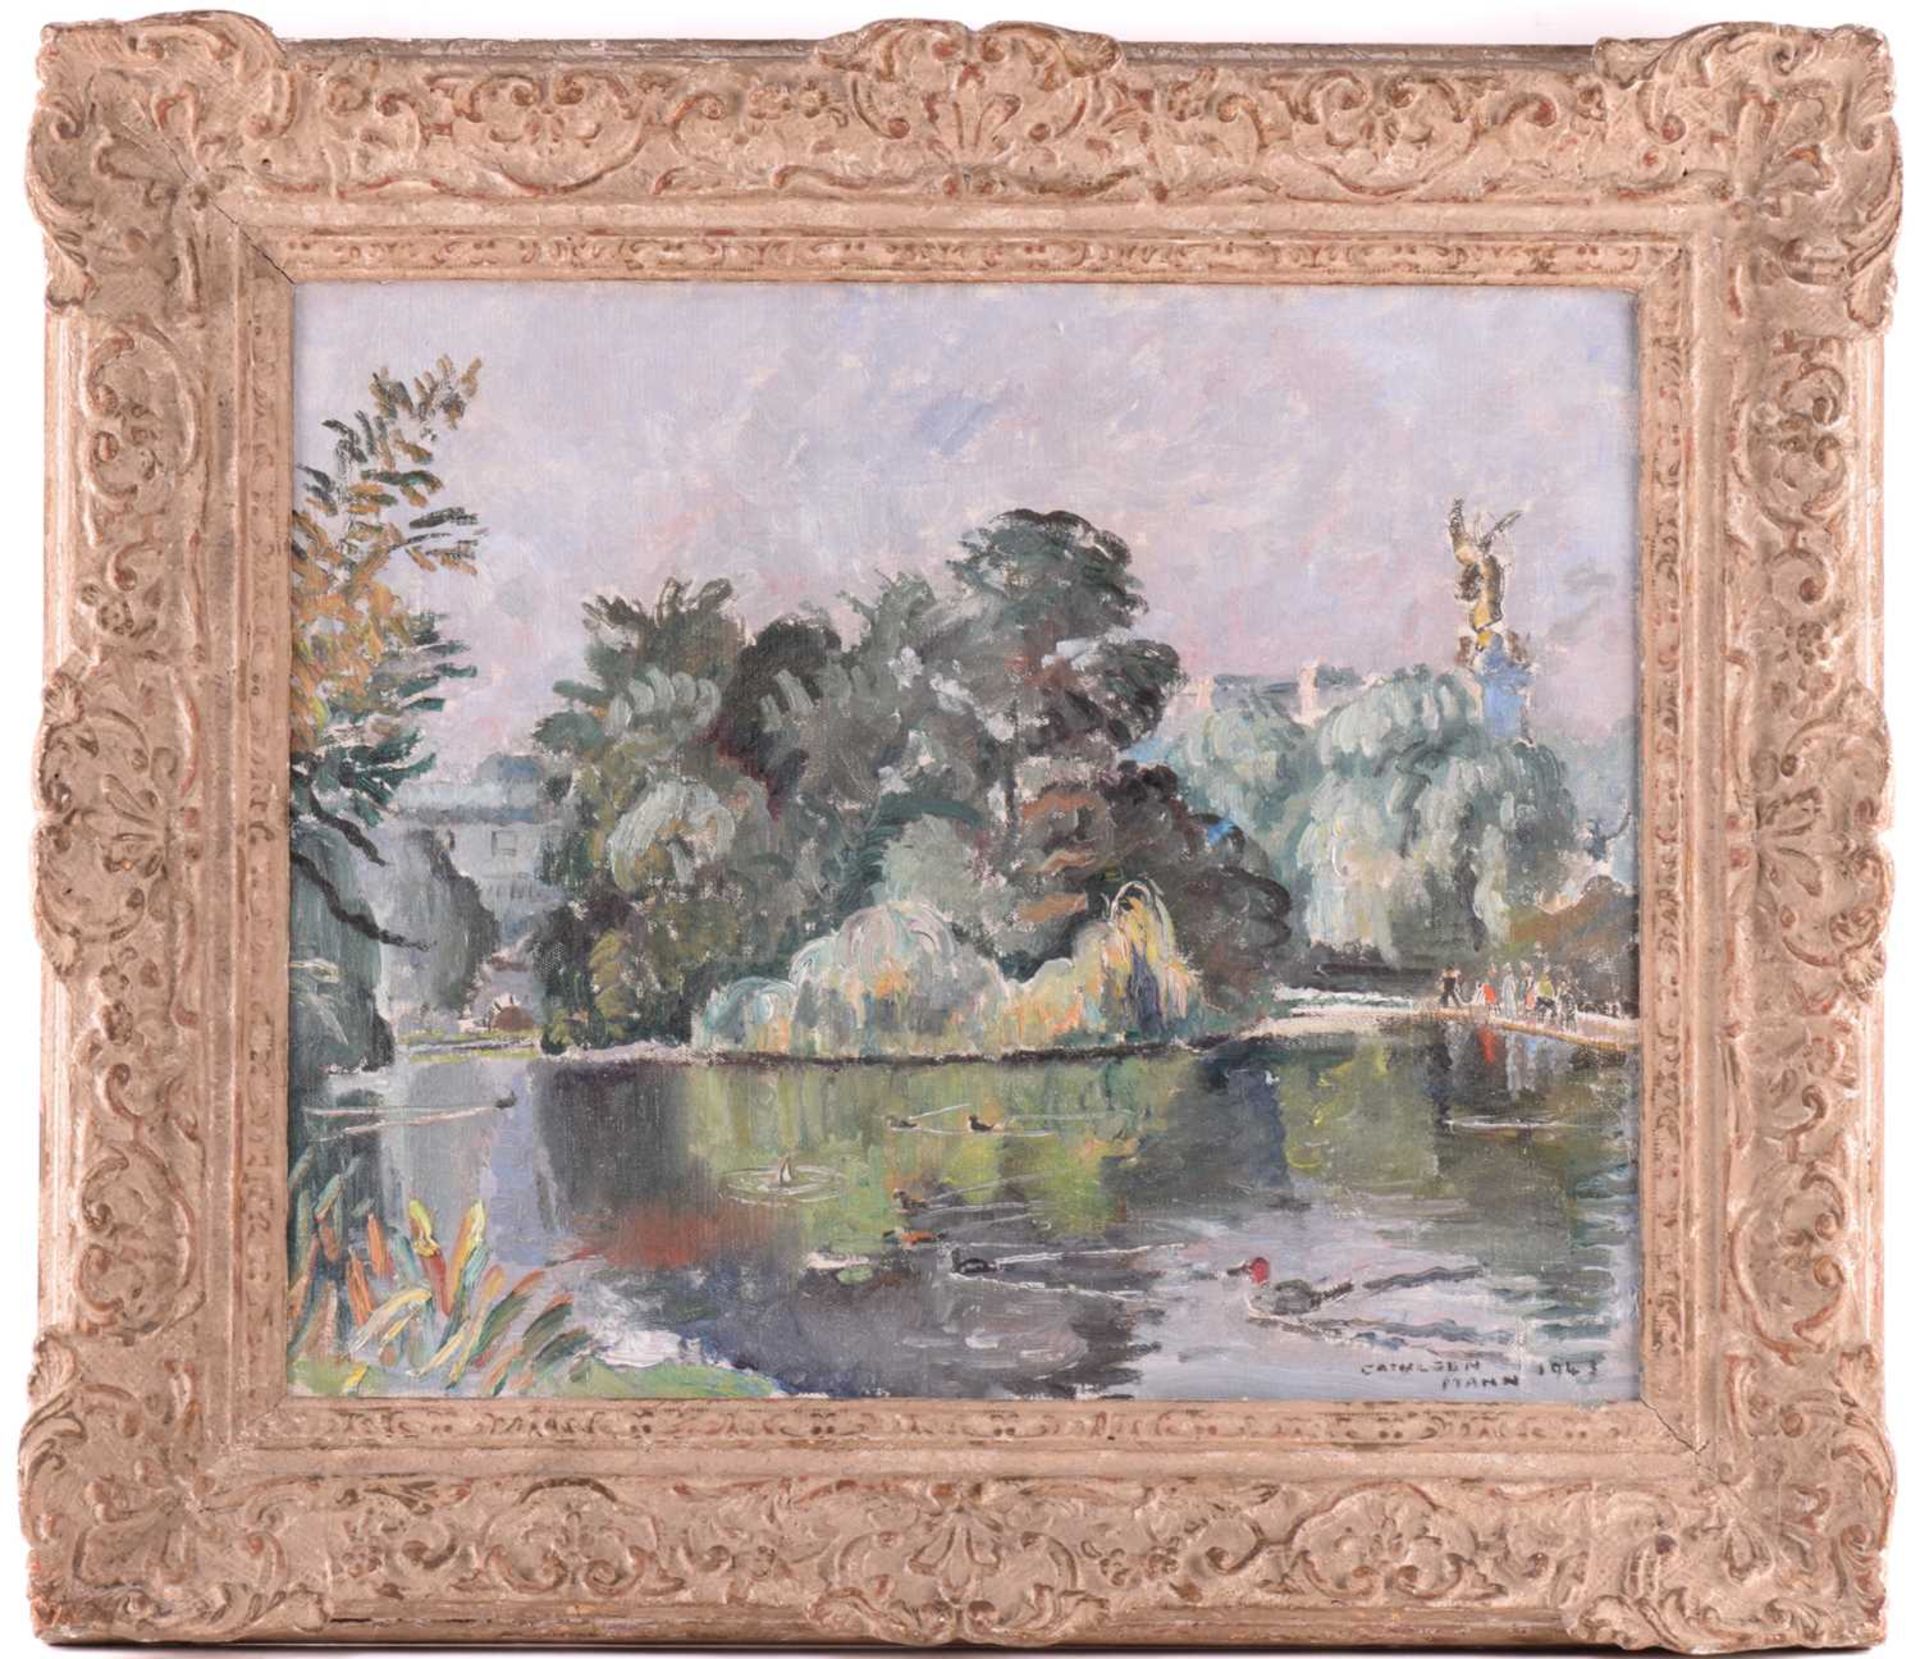 Cathleen S Mann (1896-1959), St James’ Park, signed and dated 1943, oil on canvas, 50 x 60cm, - Image 2 of 12